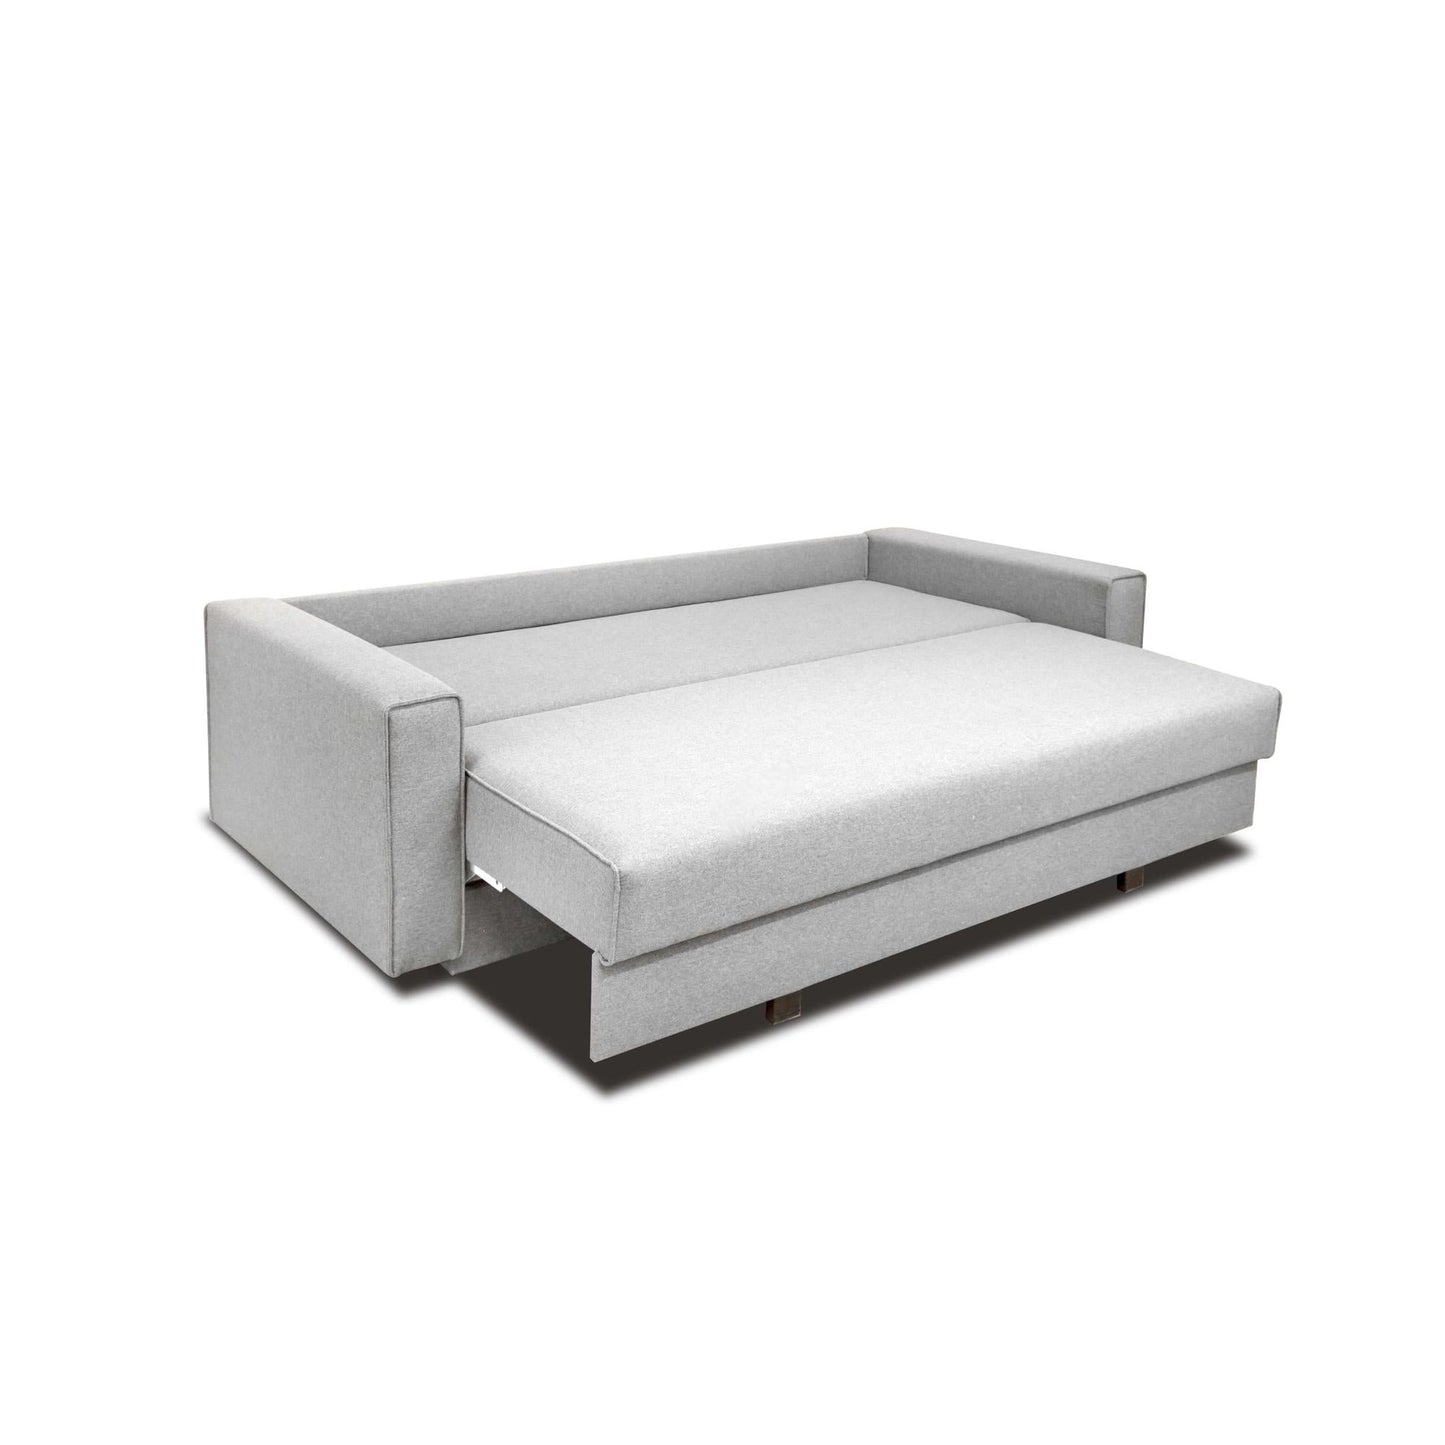 Country Modern Sofa Bed Sleeper in Perfect Light Gray